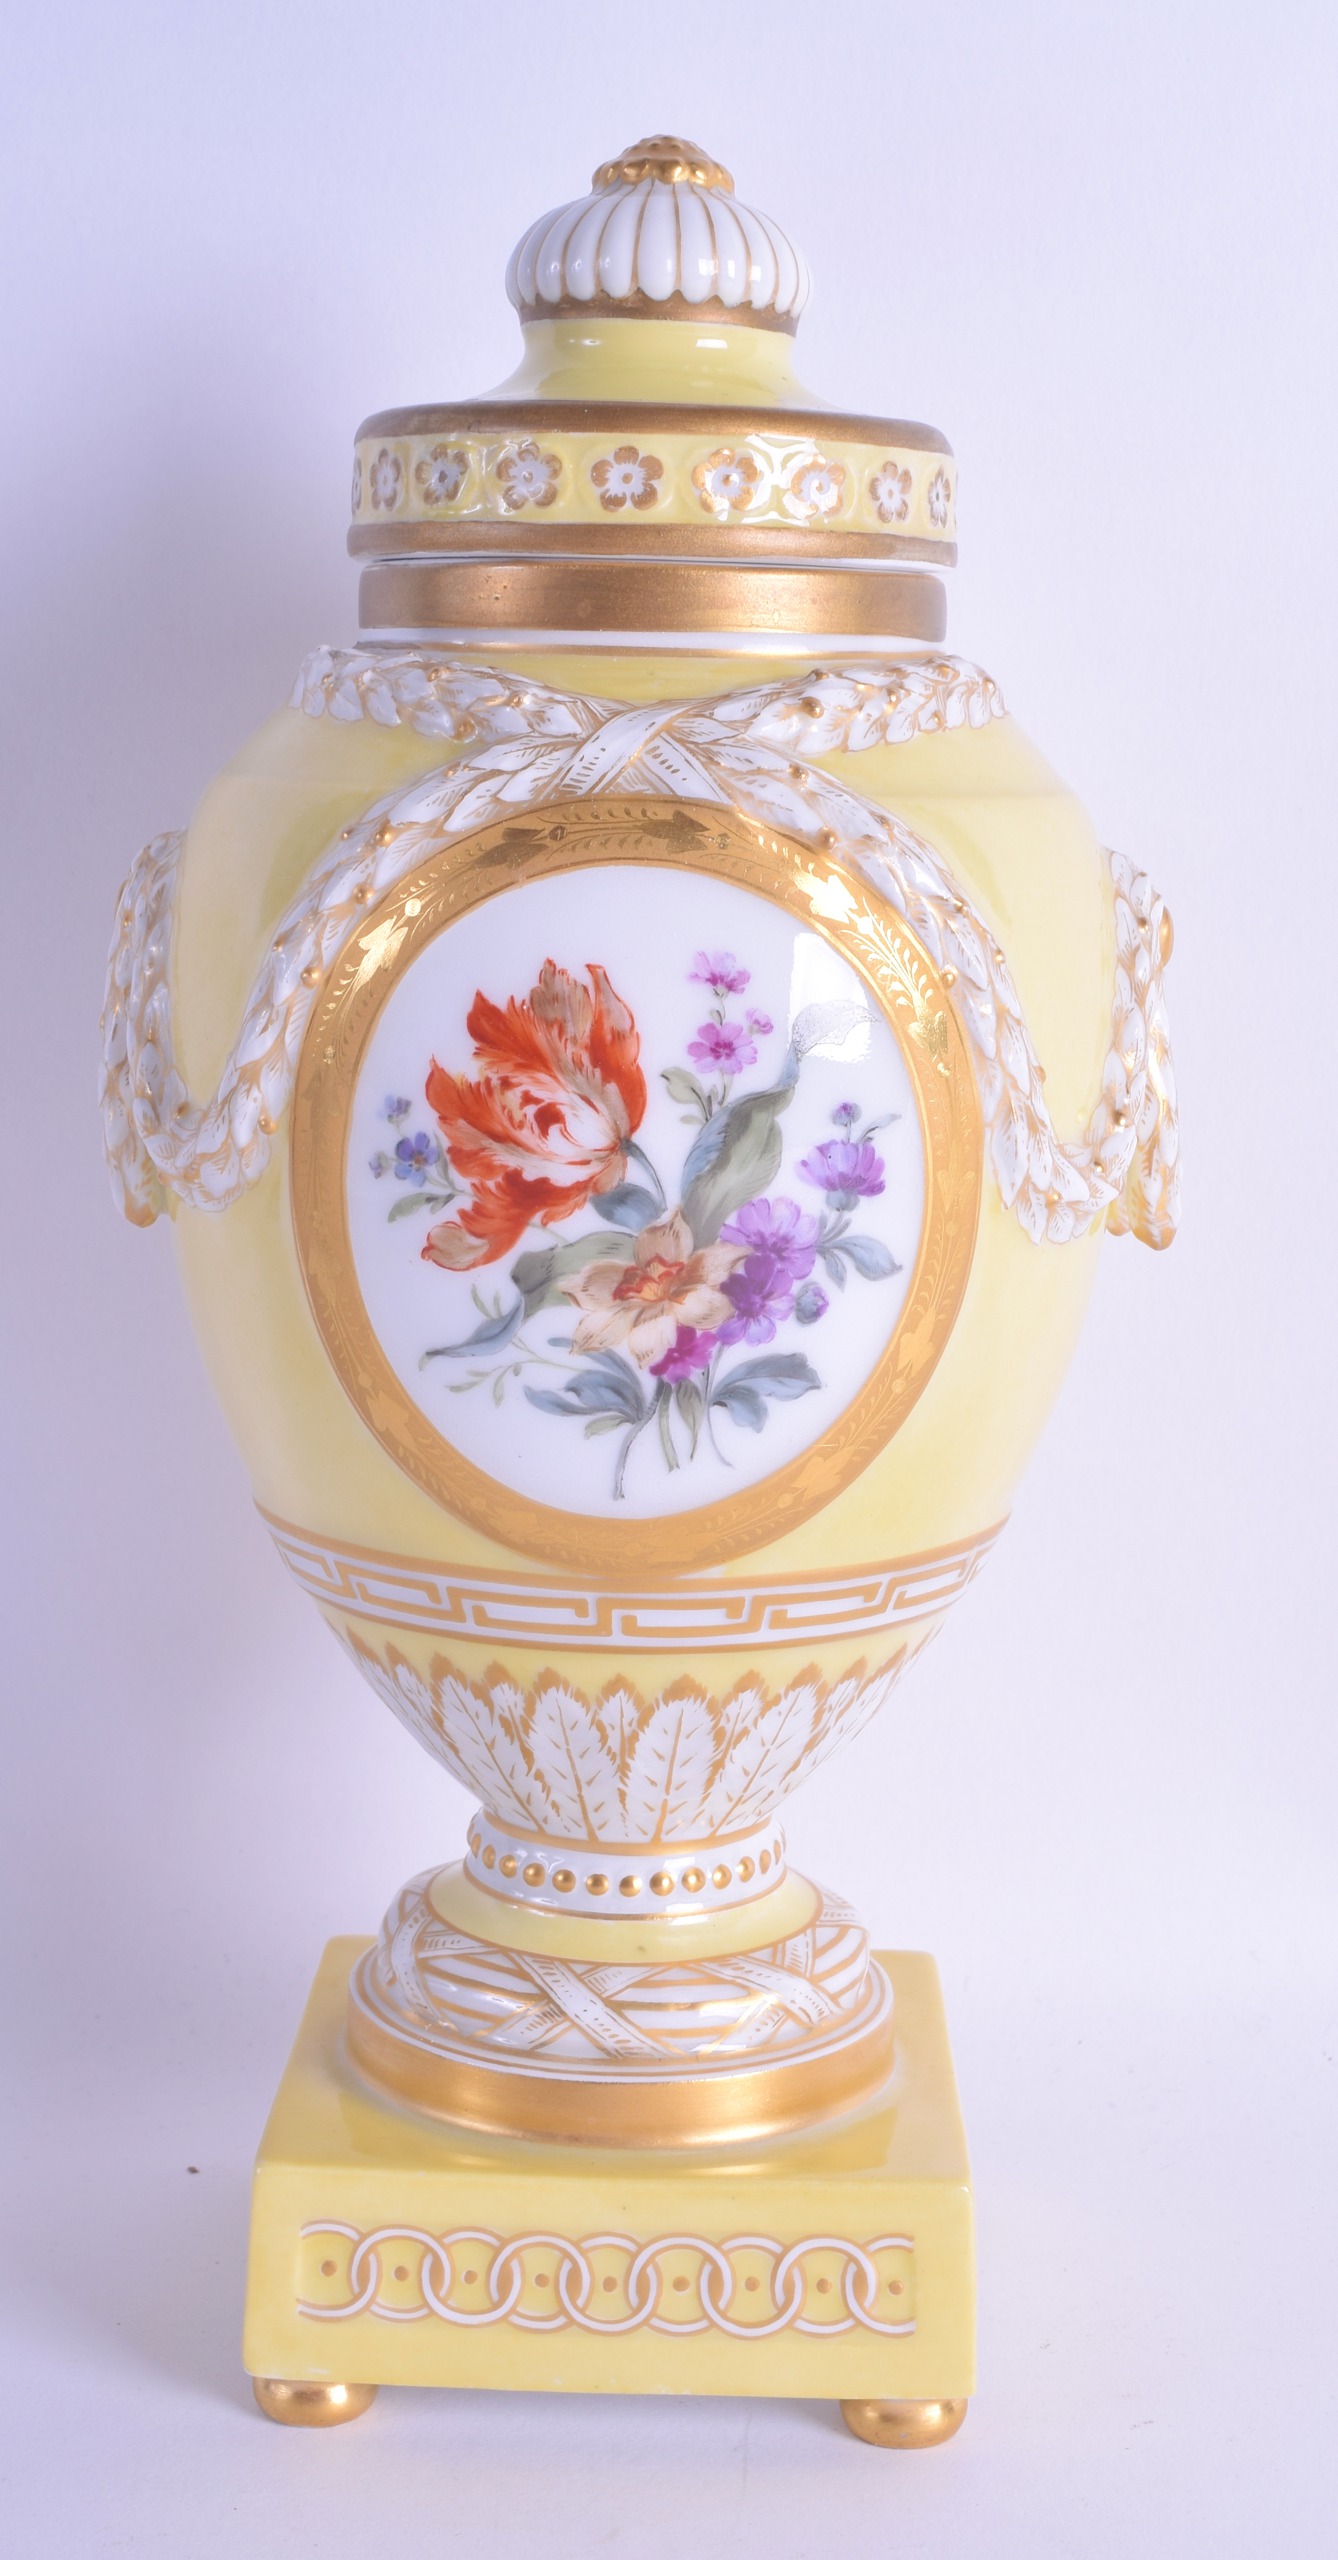 A FINE 19TH CENTURY KPM BERLIN YELLOW VASE AND COVER painted with two putti amongst clouds. 25 cm - Image 2 of 3